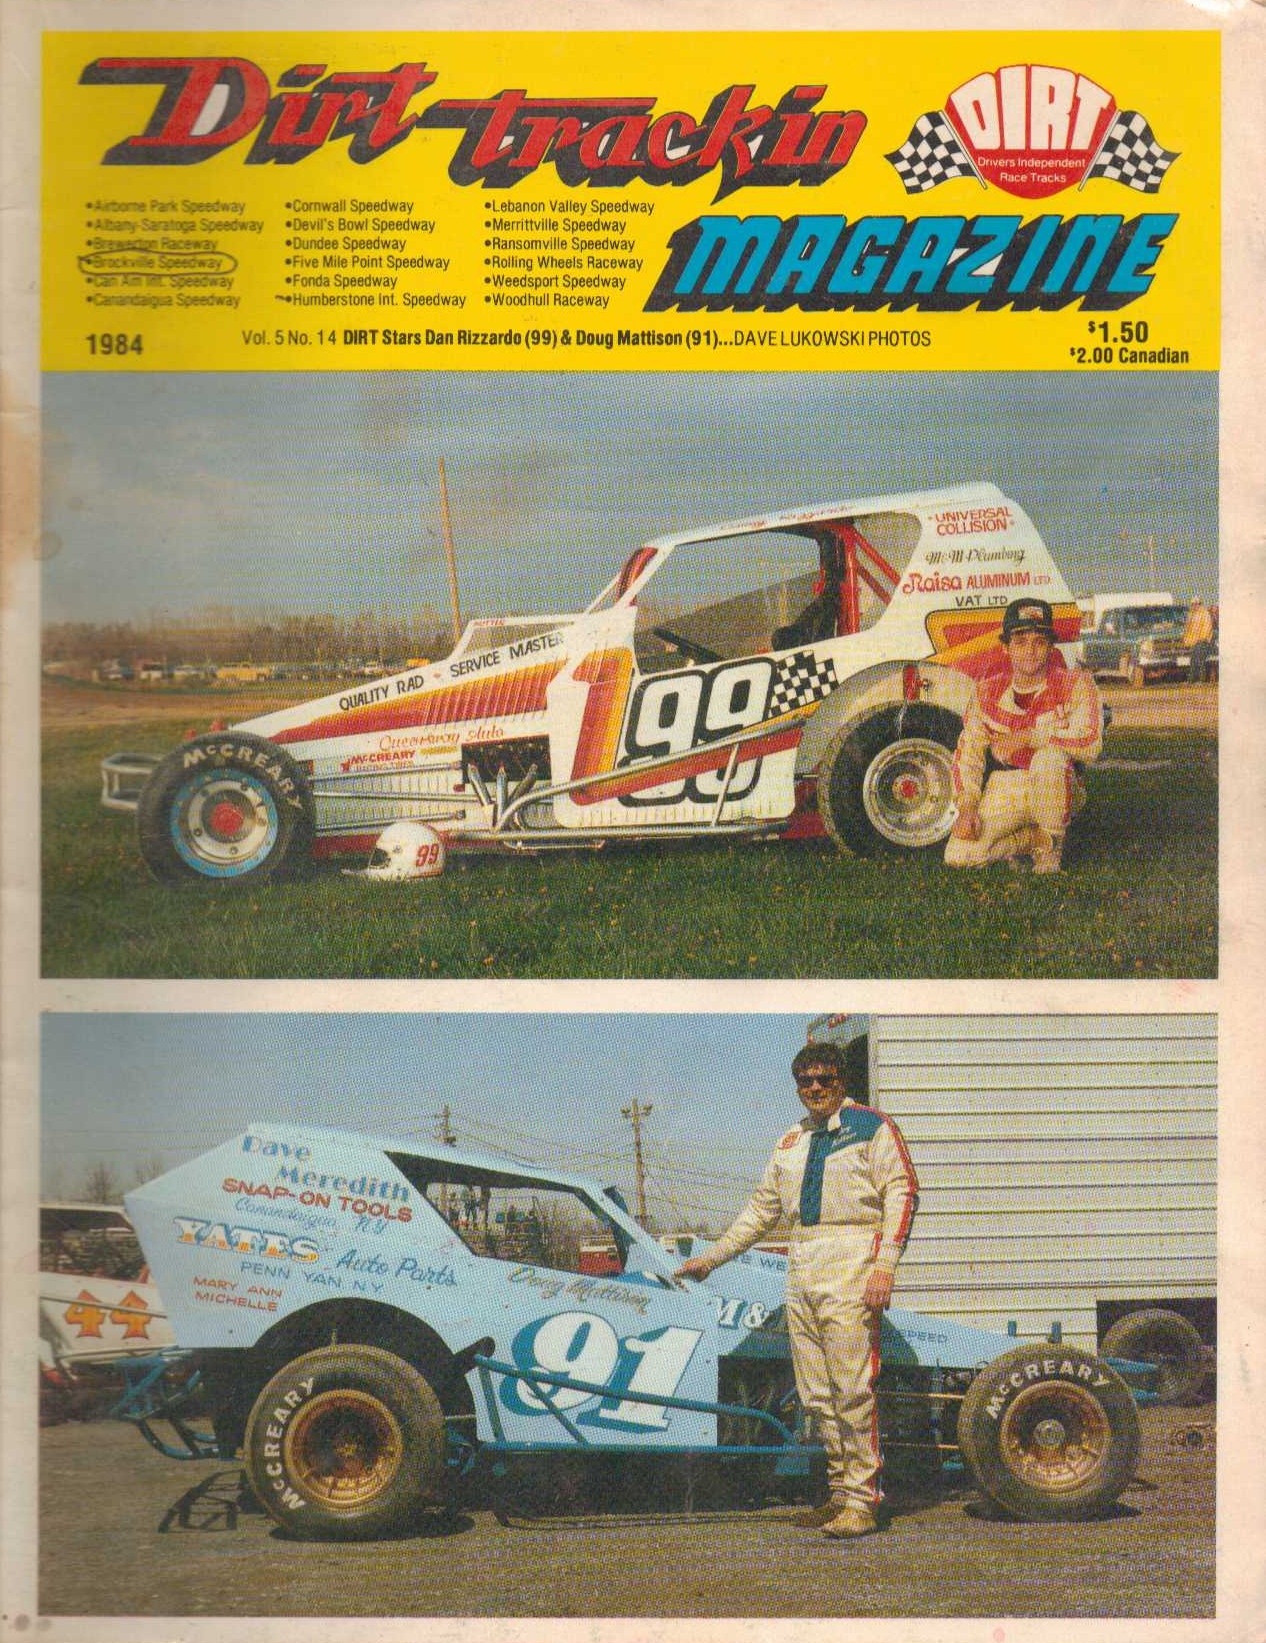 Brockville Ontario Speedway The Motor Racing Programme Covers Project